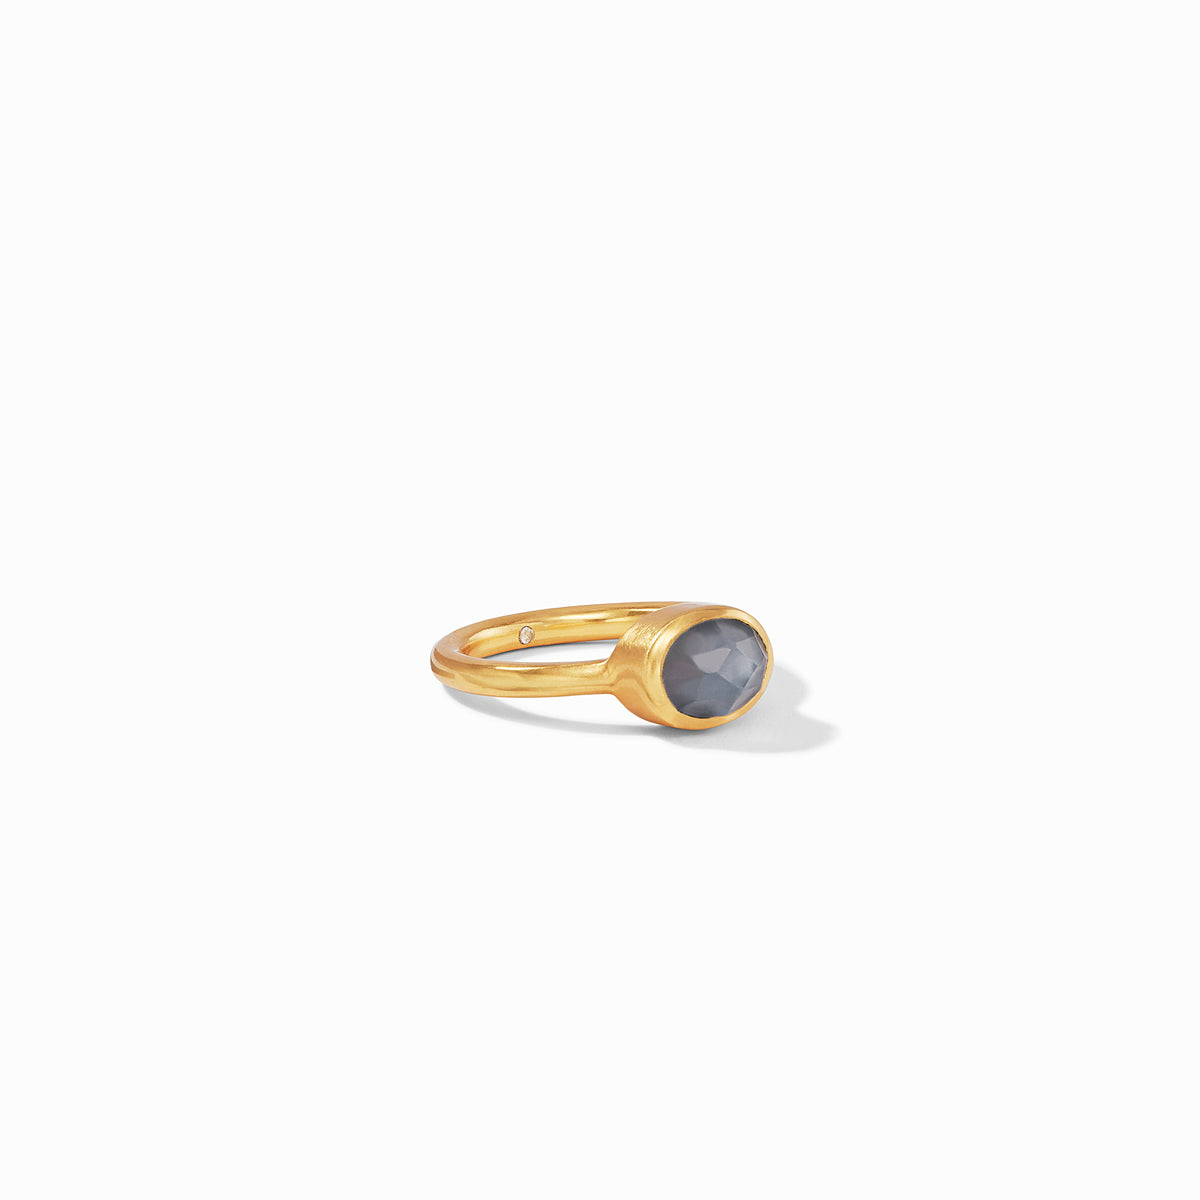 Julie Vos - Jewel Stack Ring, Iridescent Charcoal Blue / 8, Iridescent Charcoal Blue, charcoal blue, rings, best of fall